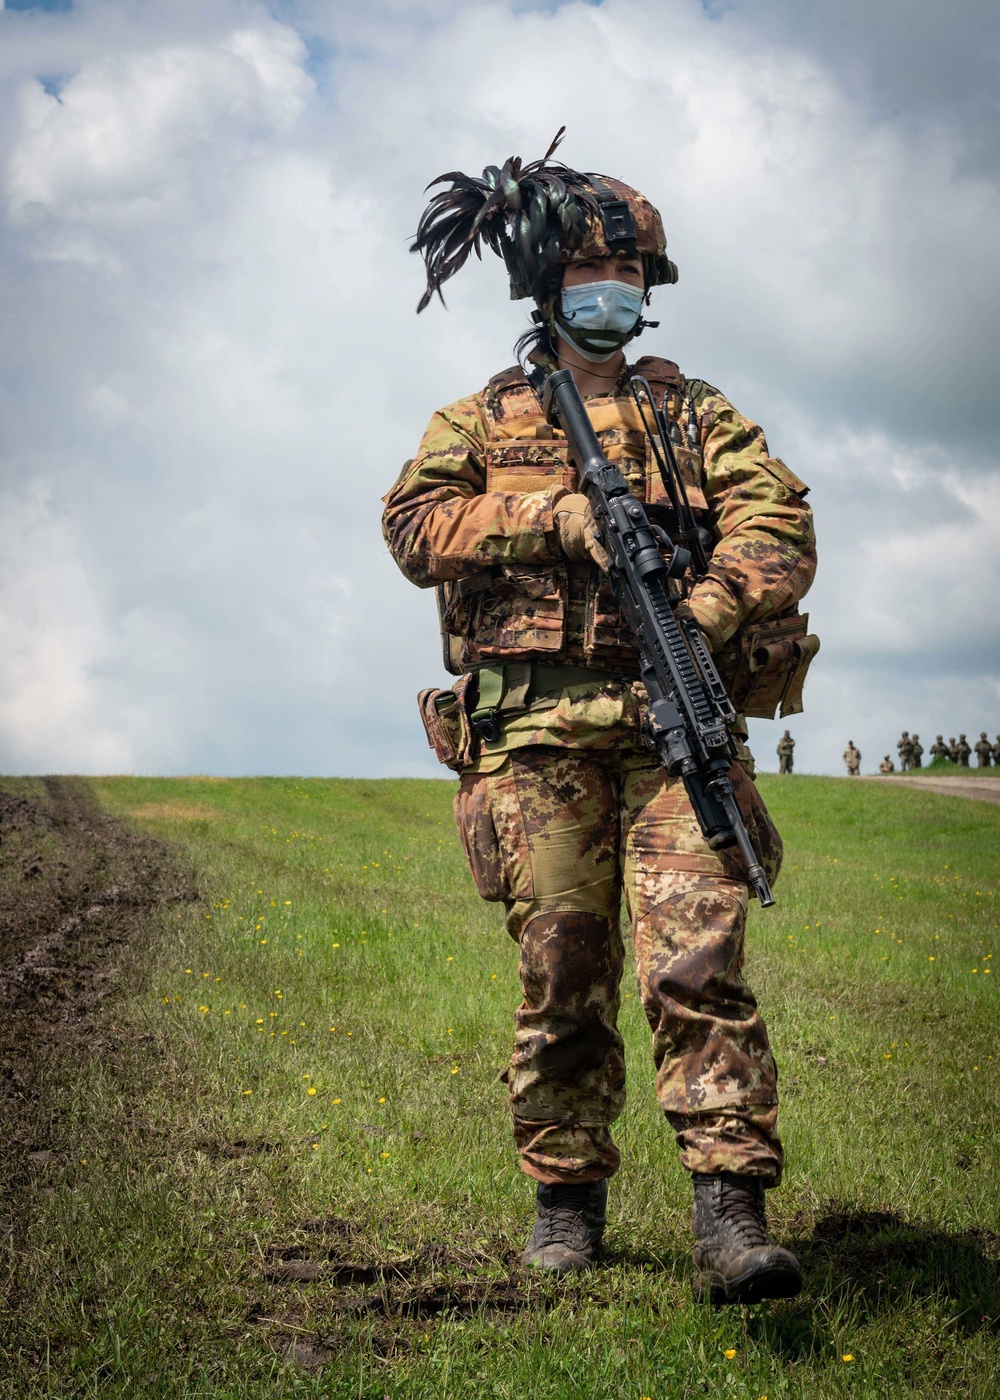 n Italian Soldier assigned to the 1st Mechanized Battalion ‘Bersaglieri’ conducts reconnaissance training during Exercise Steadfast Defender 2021